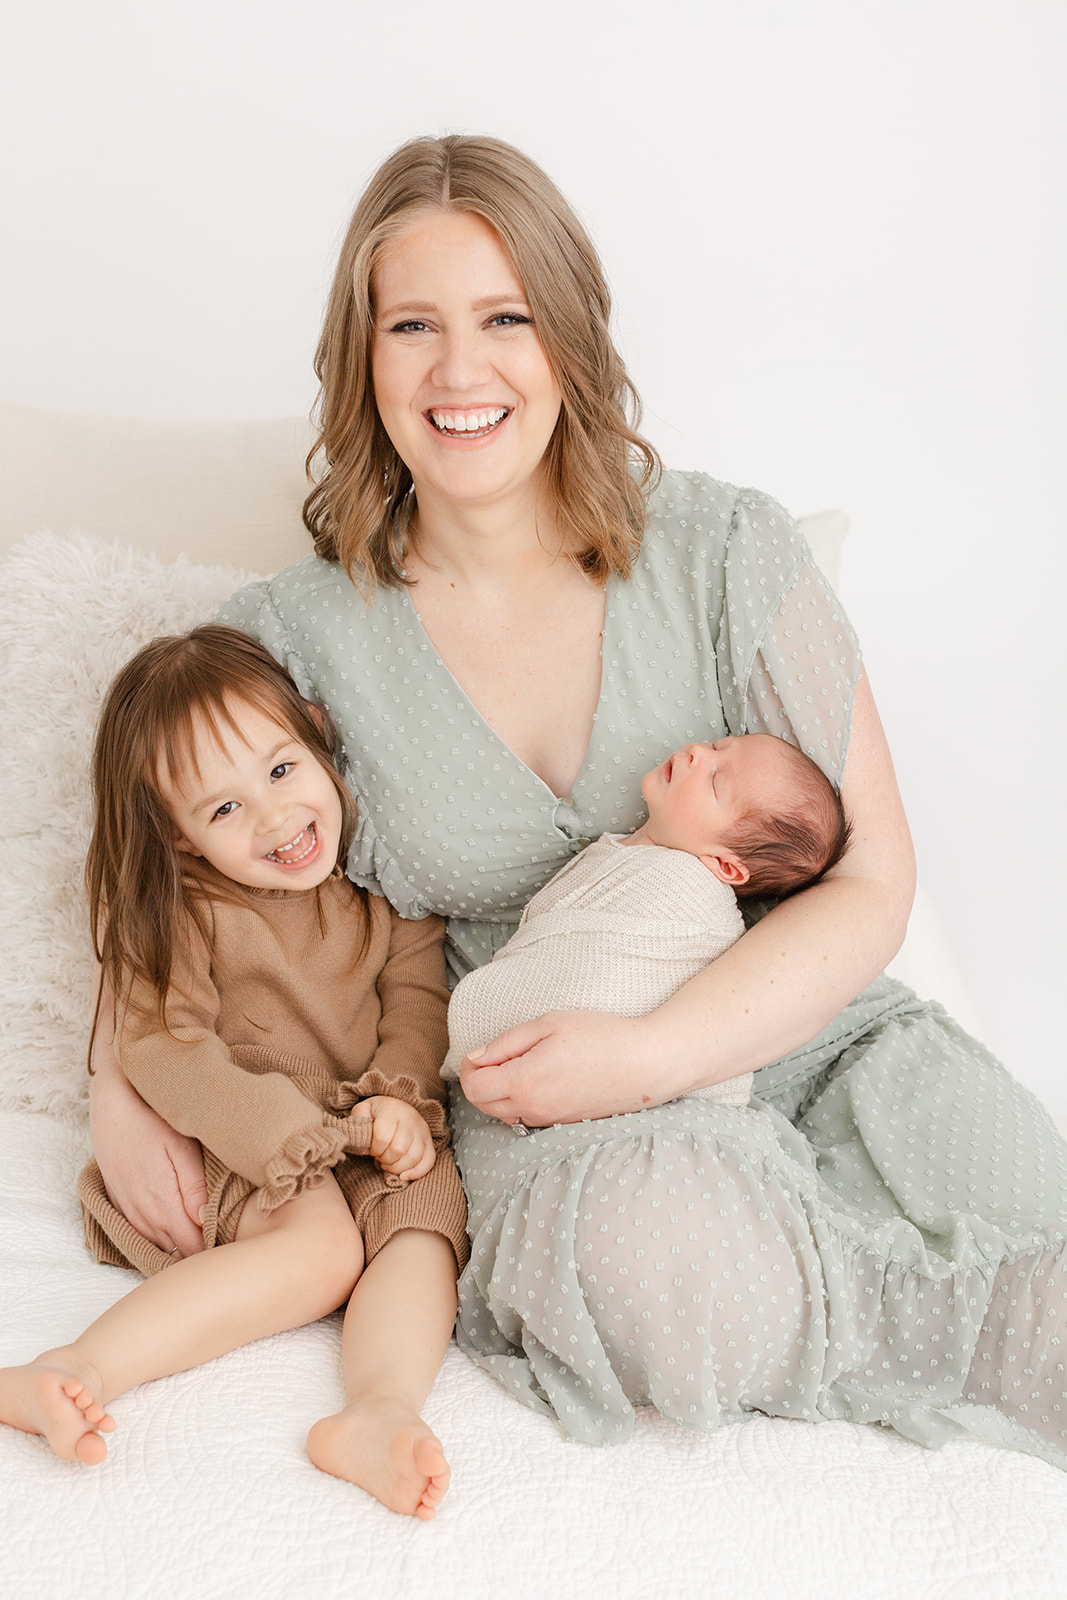 A happy mother laughs with her toddler daughter while sitting on a bed in a studio as her newborn baby sleeps in her arms